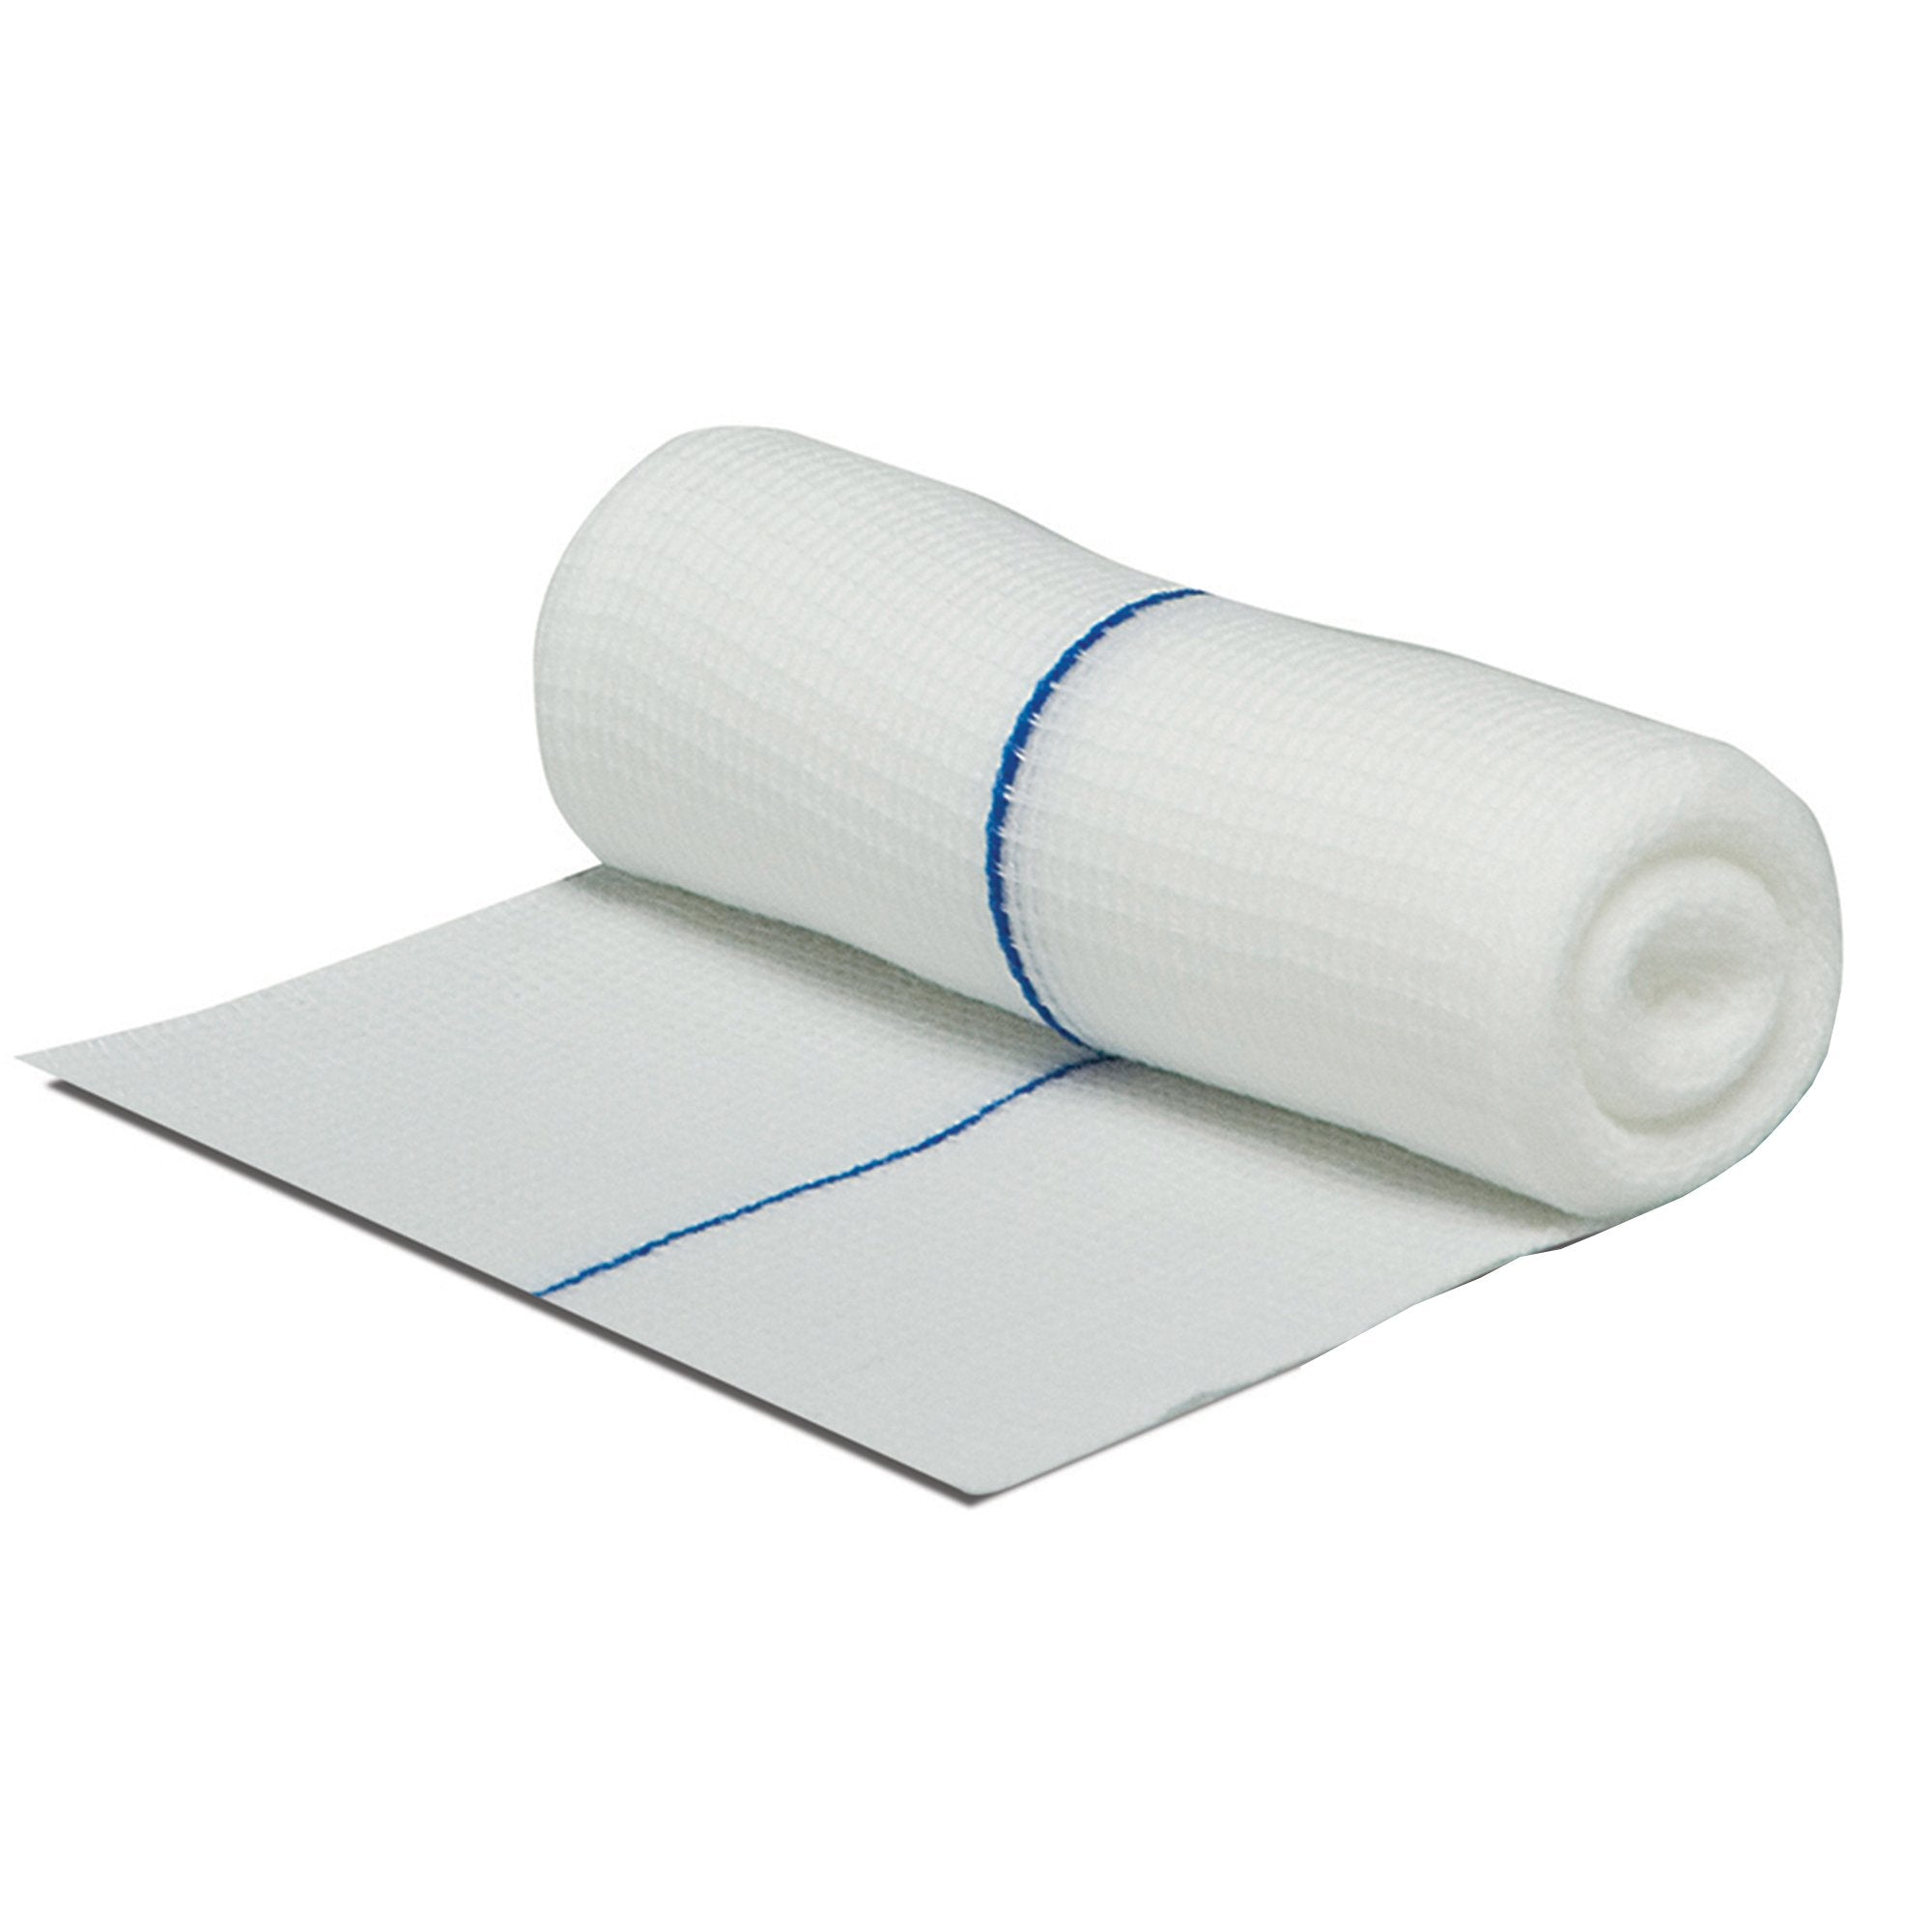 Conforming Bandage Flexicon® 4 Inch X 4-1/10 Yard 12 per Pack NonSterile 1-Ply Roll Shape